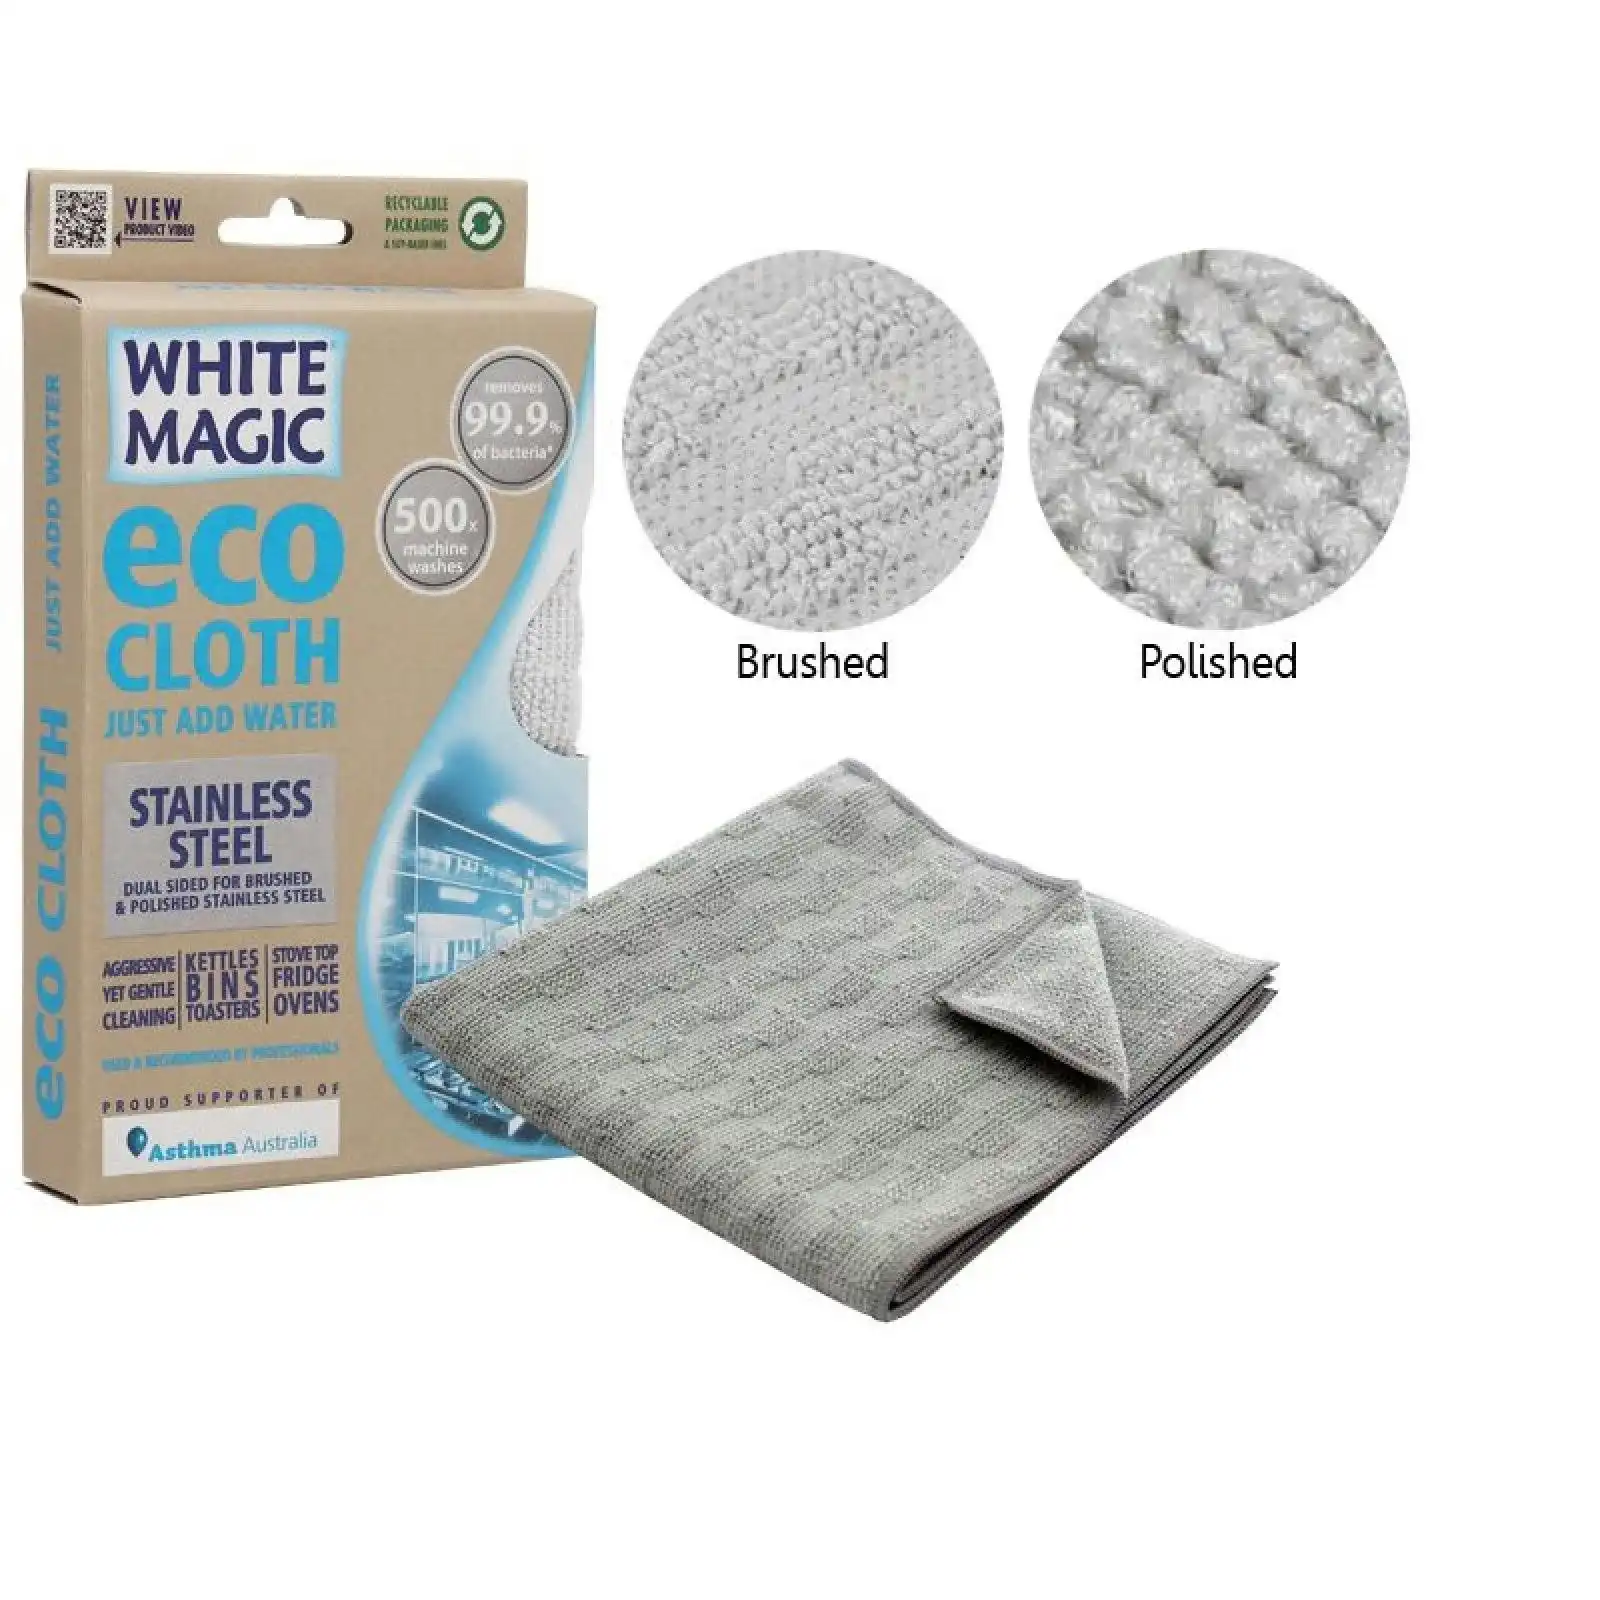 White Magic ECO CLOTH STAINLESS STEEL 32 x 32cm